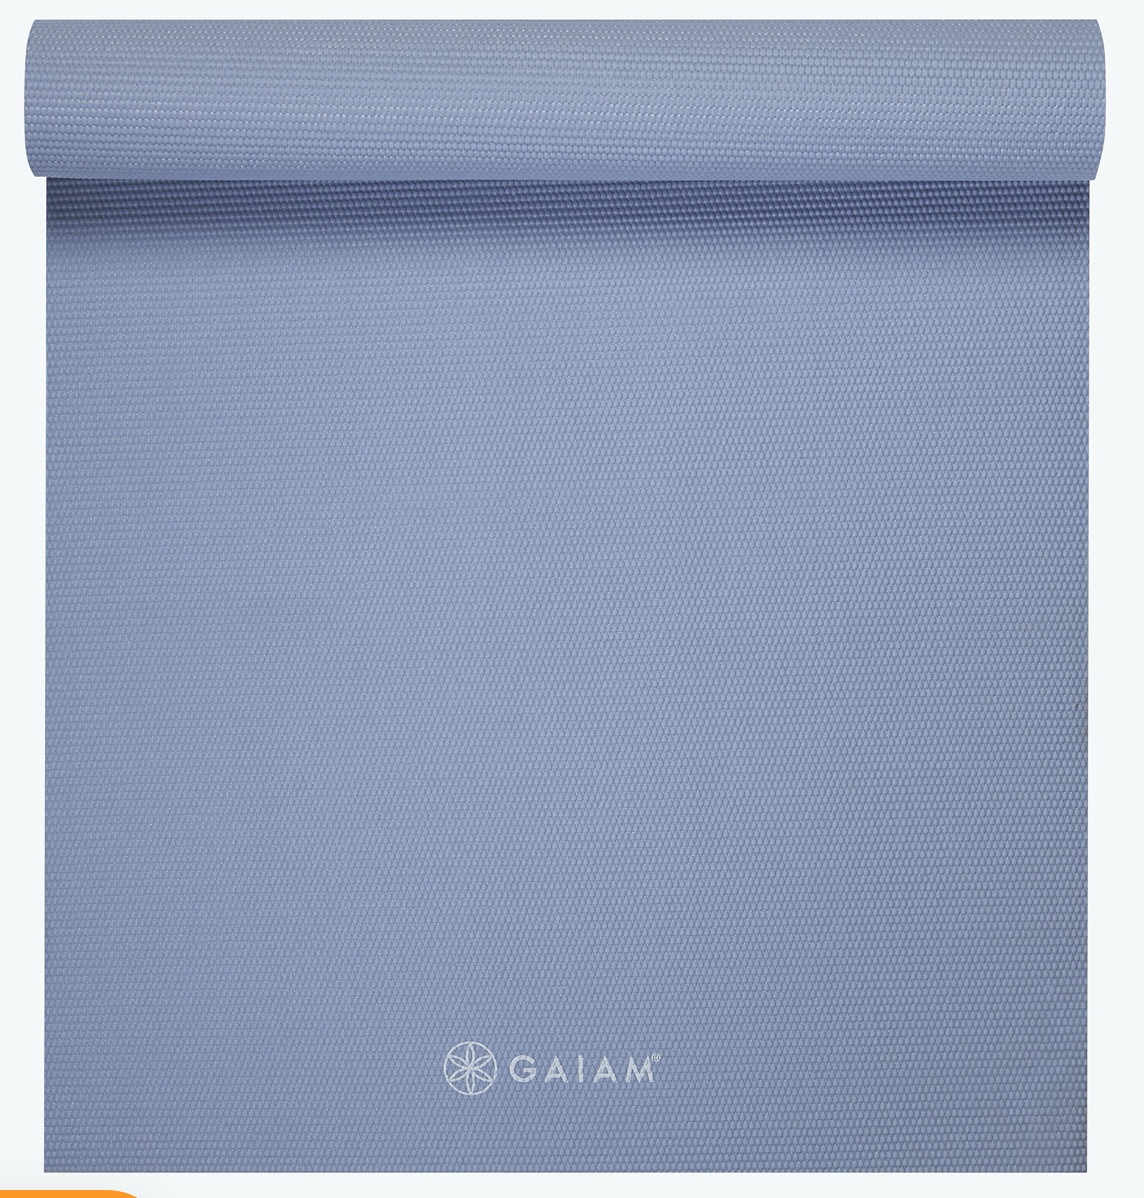 CLASSIC SOLID COLOR YOGA MATS (5MM) - Chambray